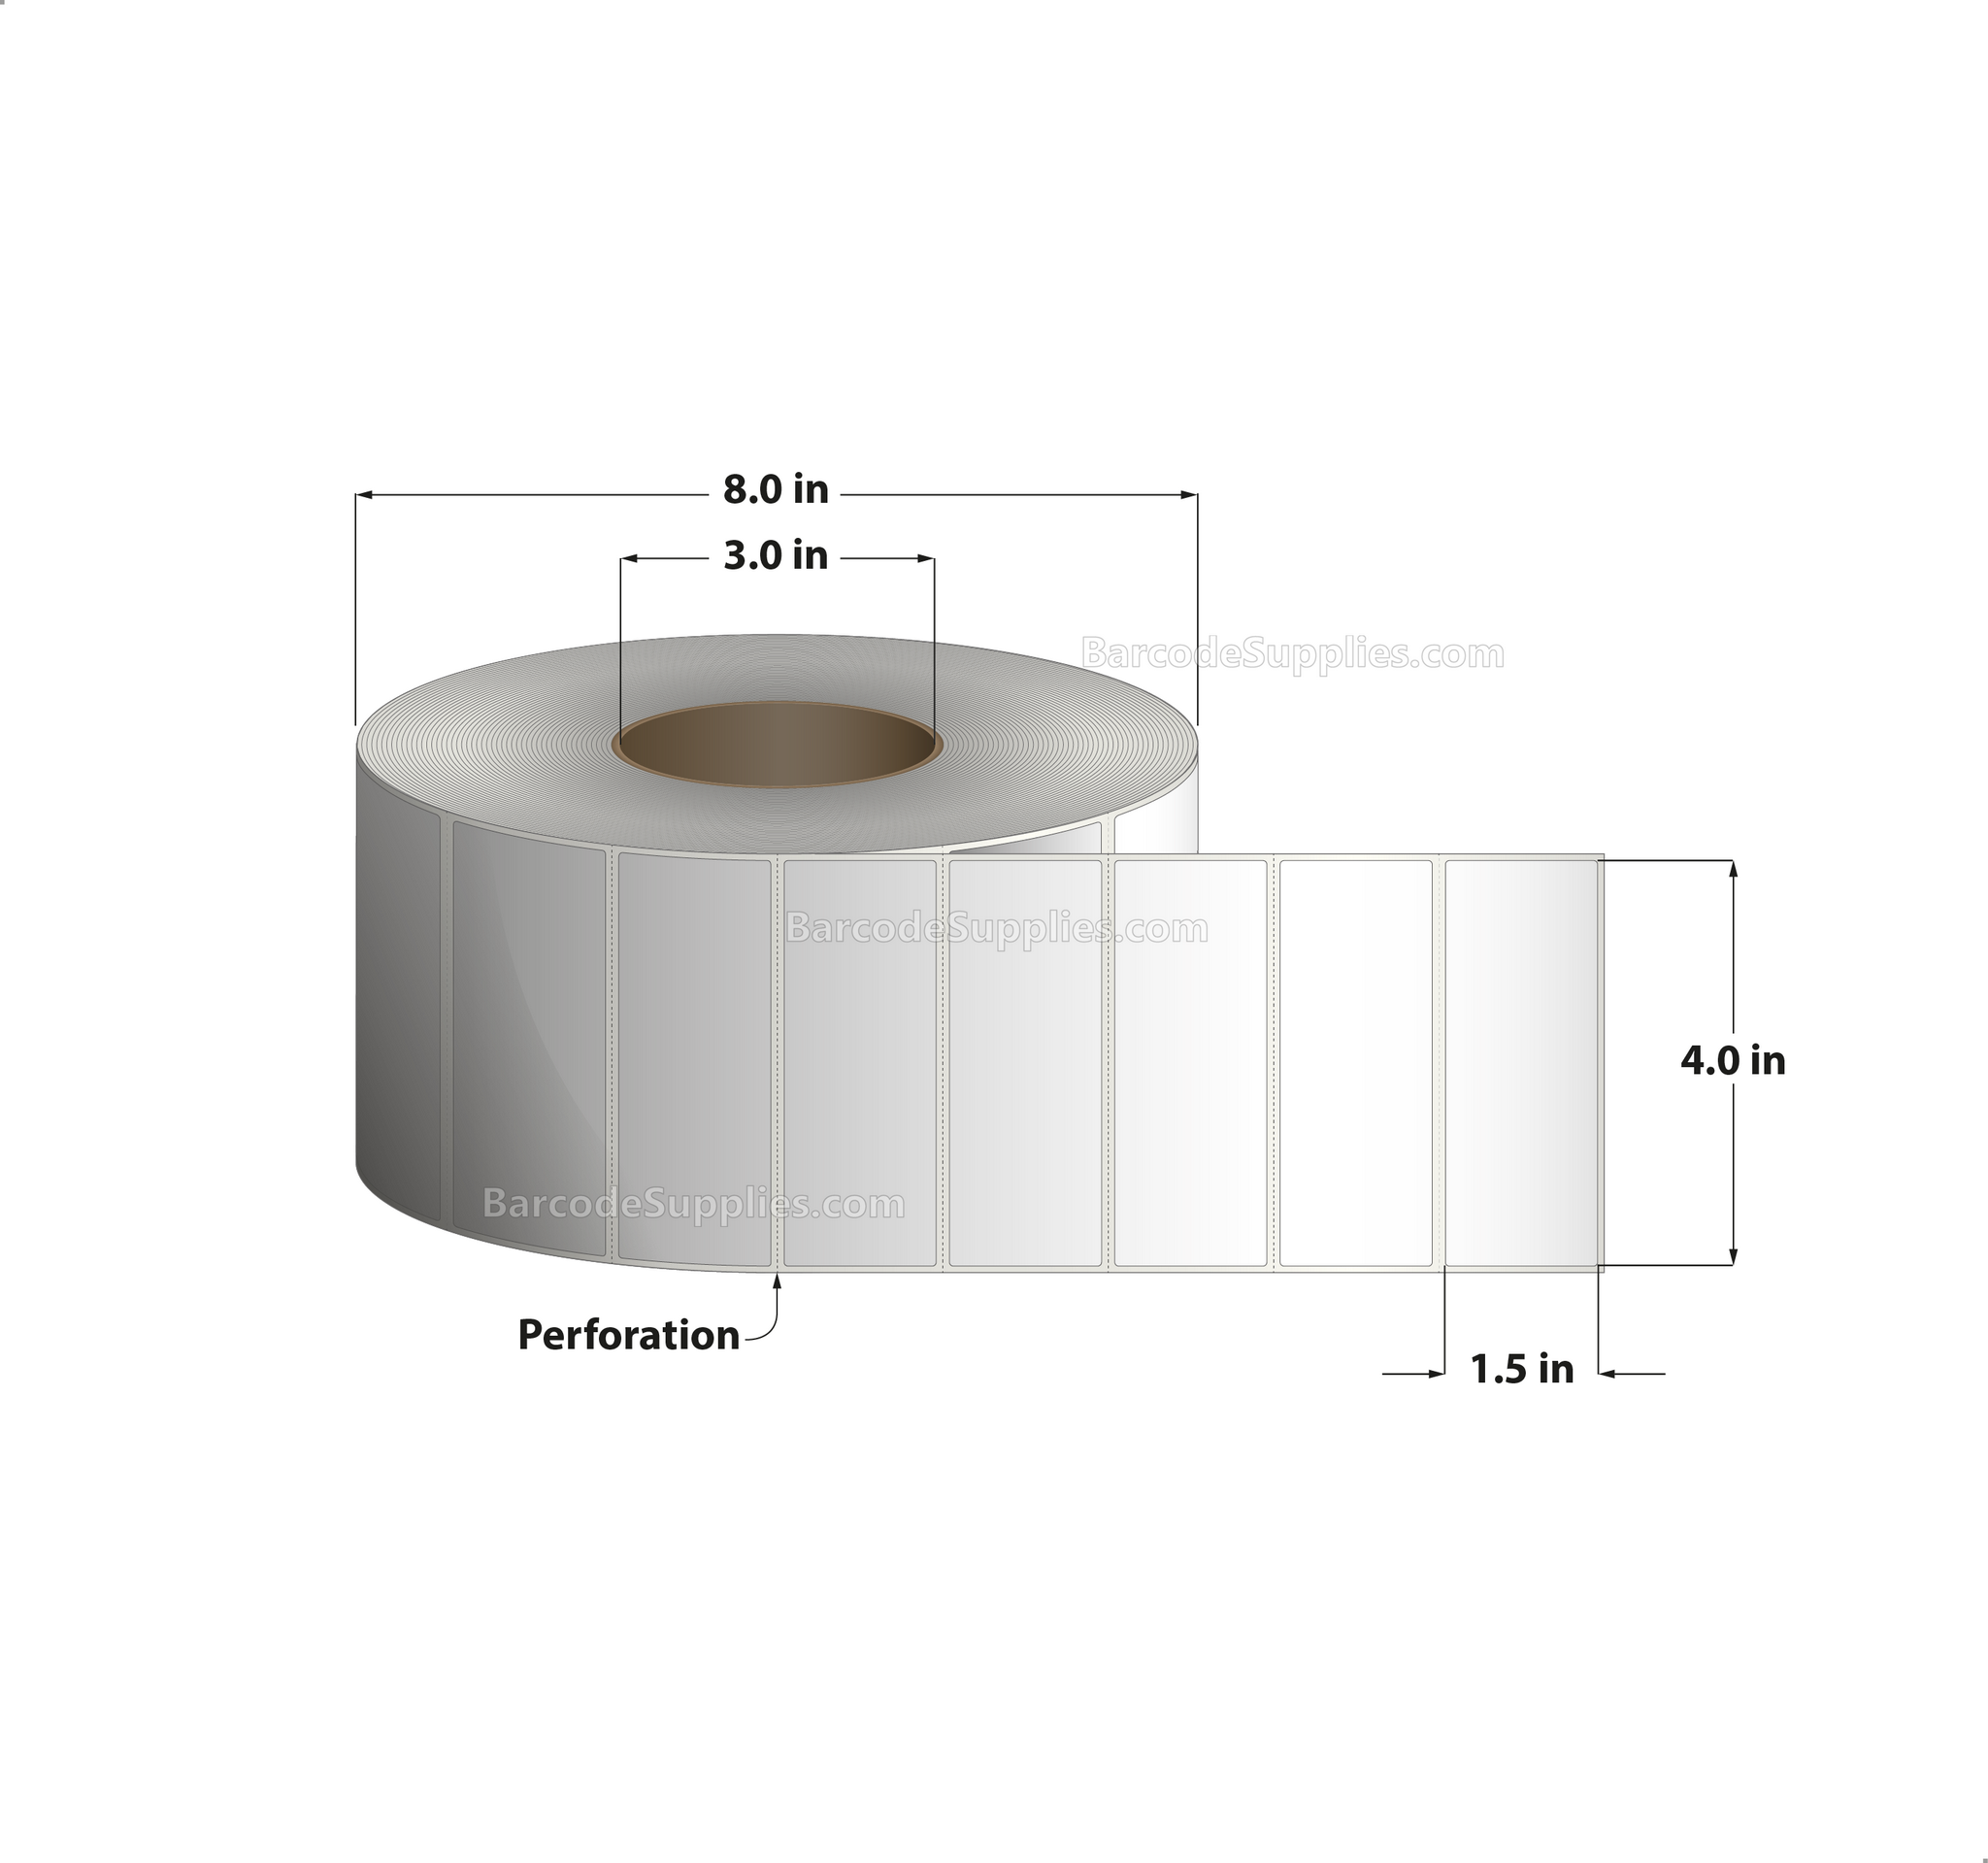 4 x 1.5 Thermal Transfer White Labels With Permanent Acrylic Adhesive - Perforated - 3600 Labels Per Roll - Carton Of 4 Rolls - 14400 Labels Total - MPN: TH415-1P